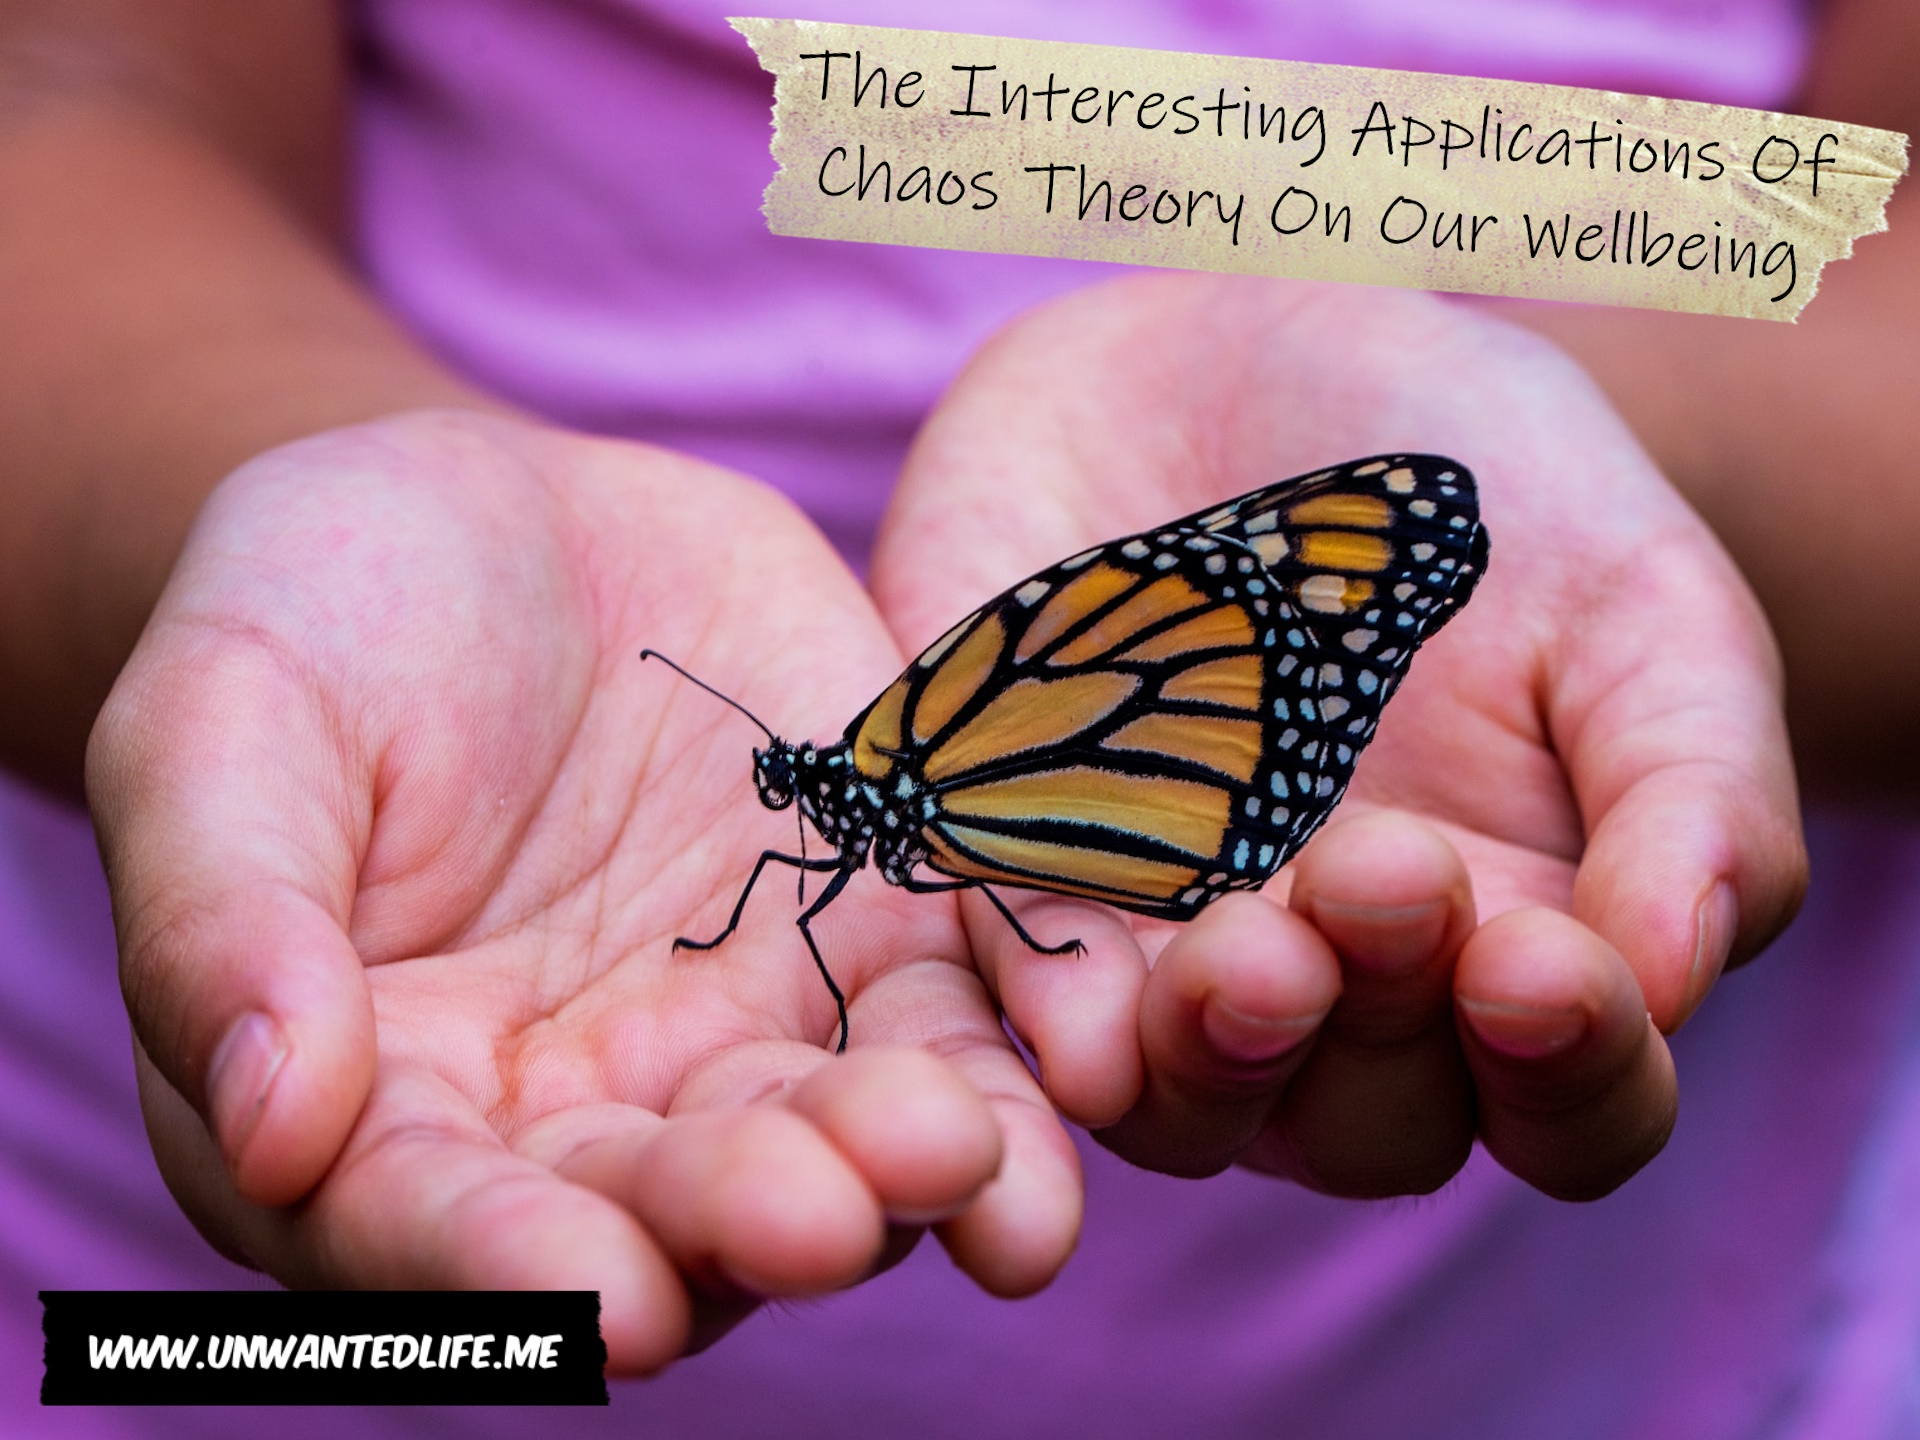 A photo of a Black child holding a butterfly in their hands to represent the topic of the article - The Interesting Applications Of Chaos Theory On Our Wellbeing